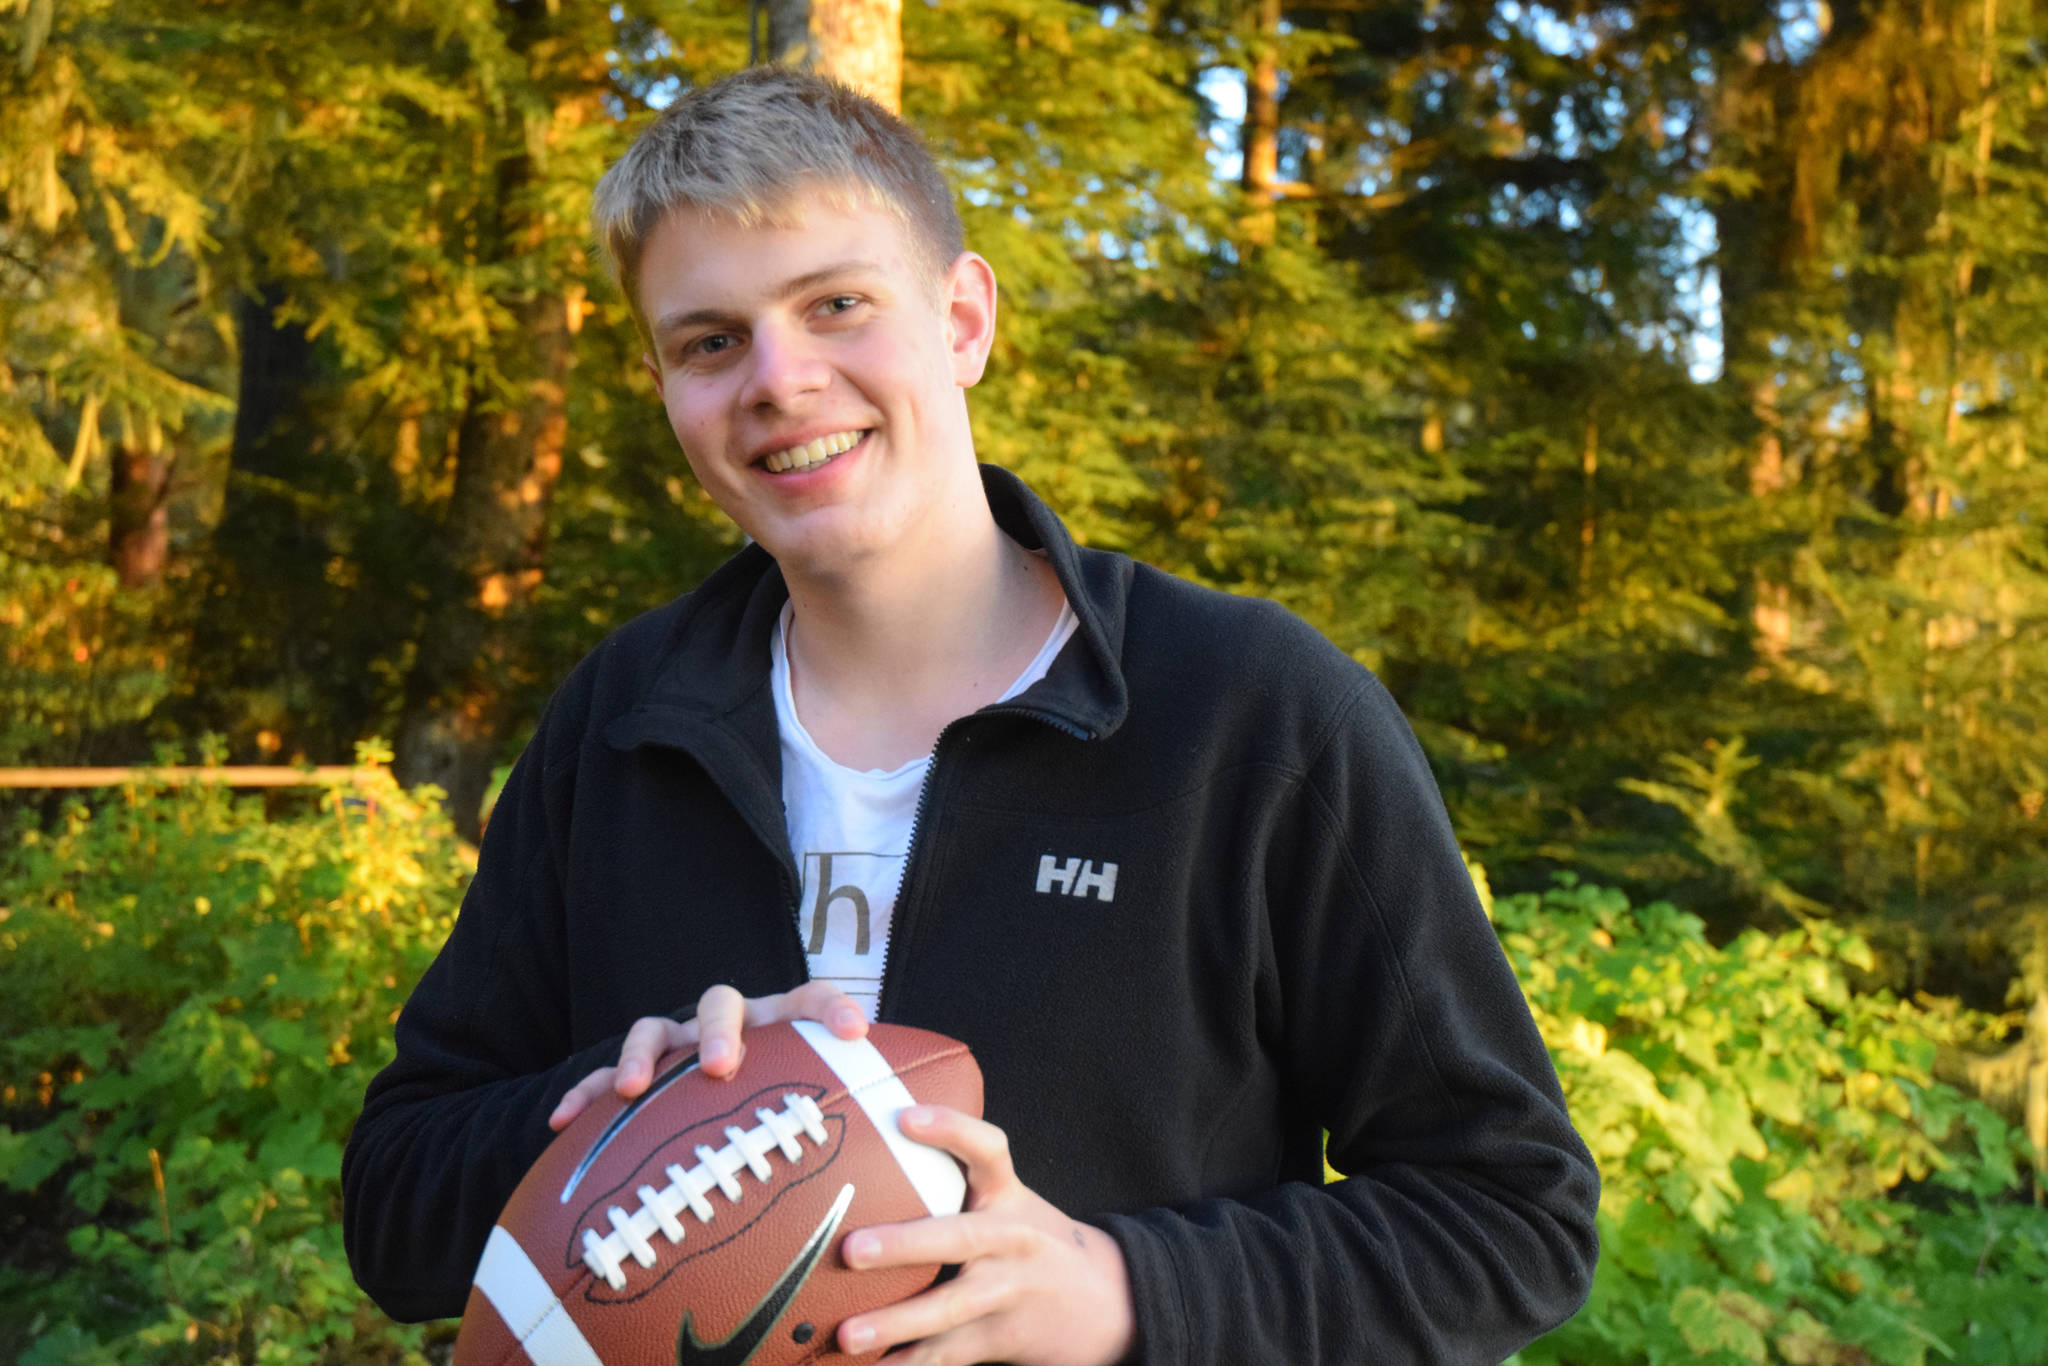 Gregor Schniewindt, 16, a Thunder Mountain High School junior German exchange student with the Rotary Club, in the seaside backyard of his host family this fall. The Neuenrade, Germany native played for the TMHS football team this year. (Nolin Ainsworth | Juneau Empire)